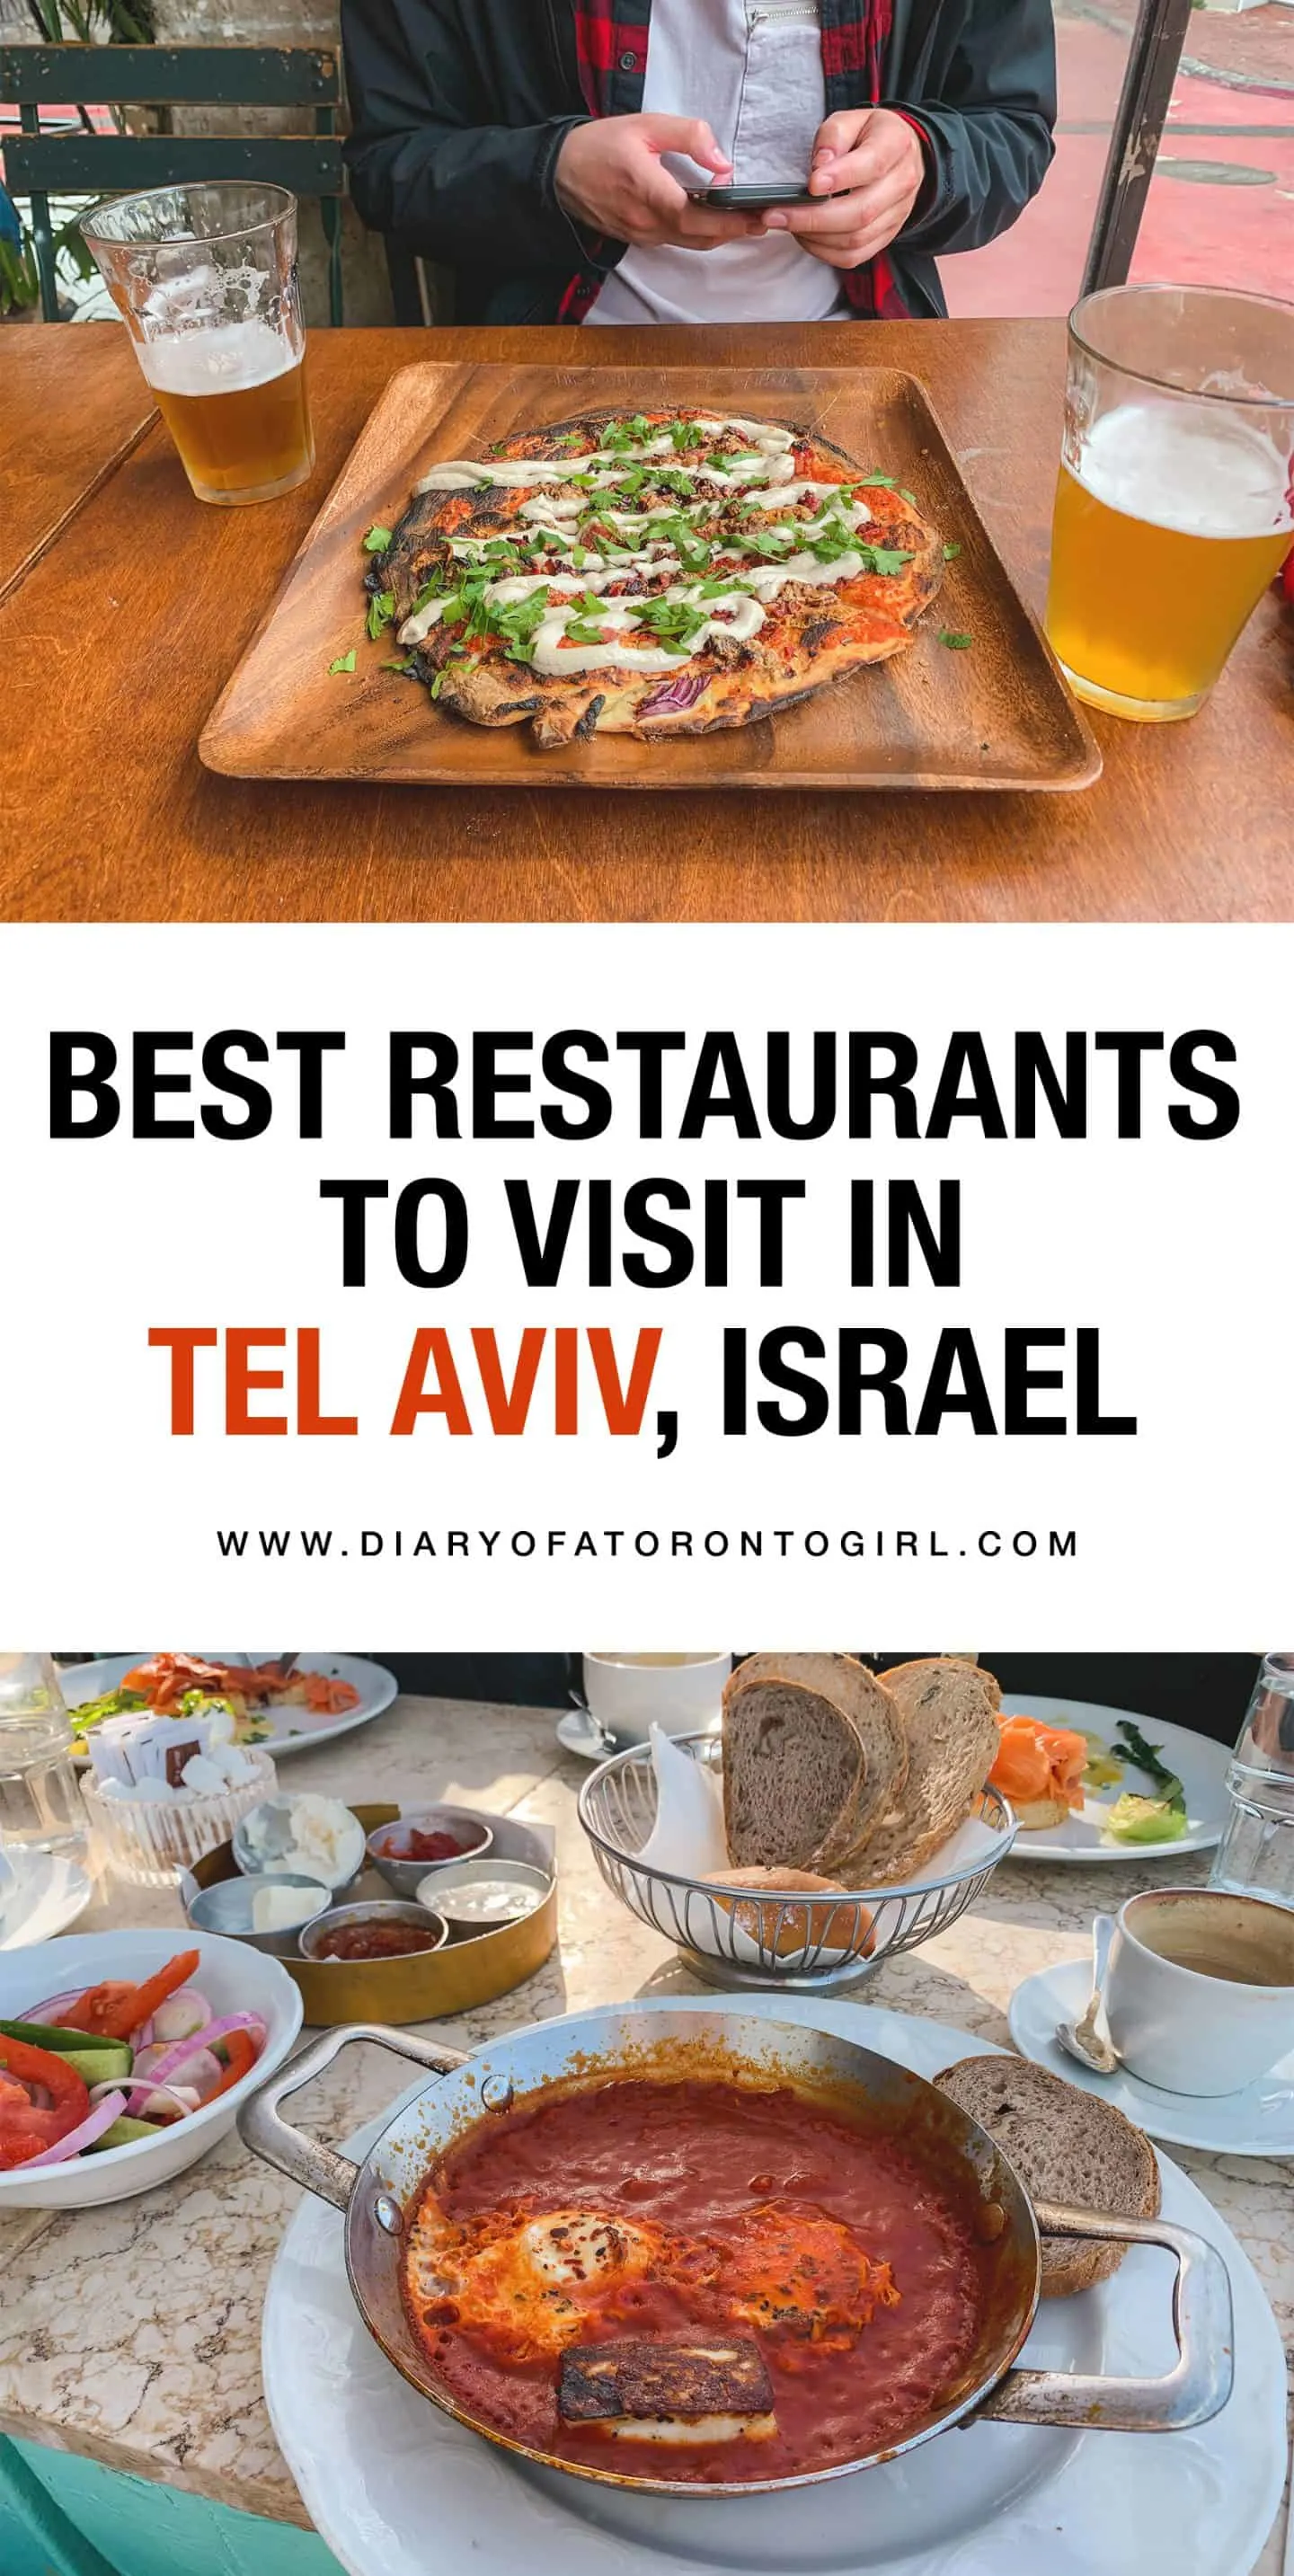 The best restaurants to visit in Tel Aviv, Israel, including all the top spots to eat and drink!